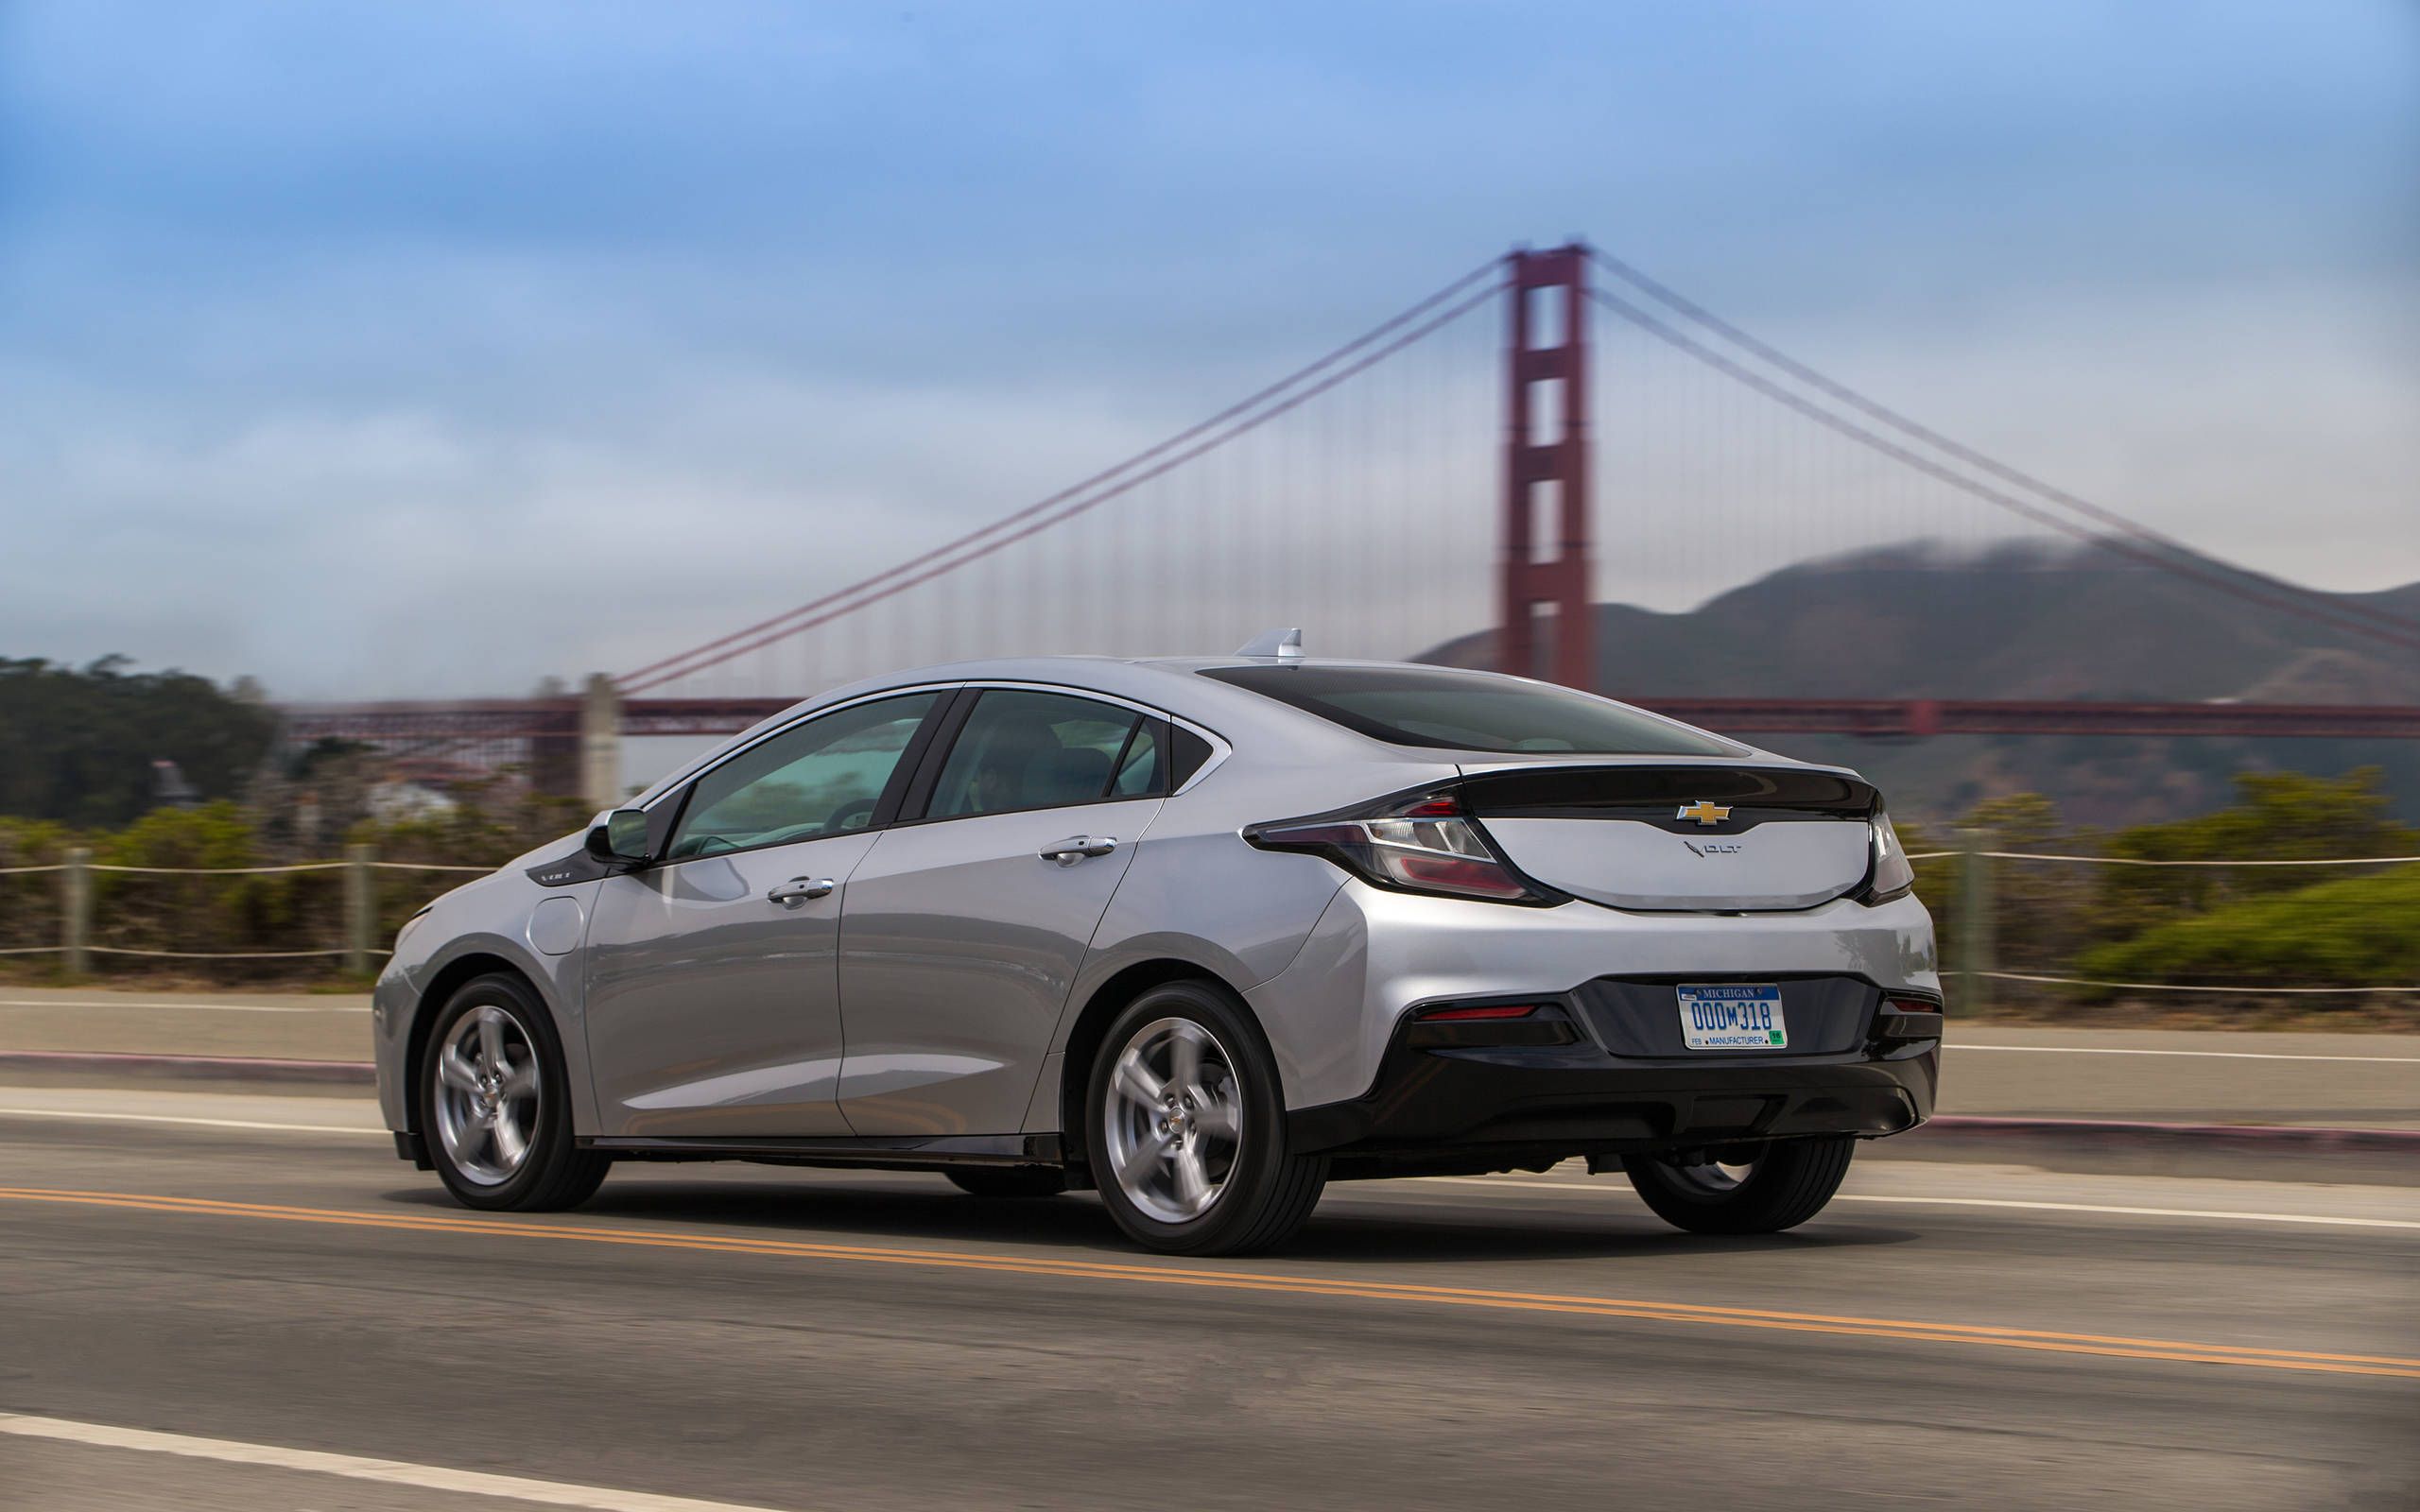 2016 Chevrolet Volt Premier review: Game changer changes the game again